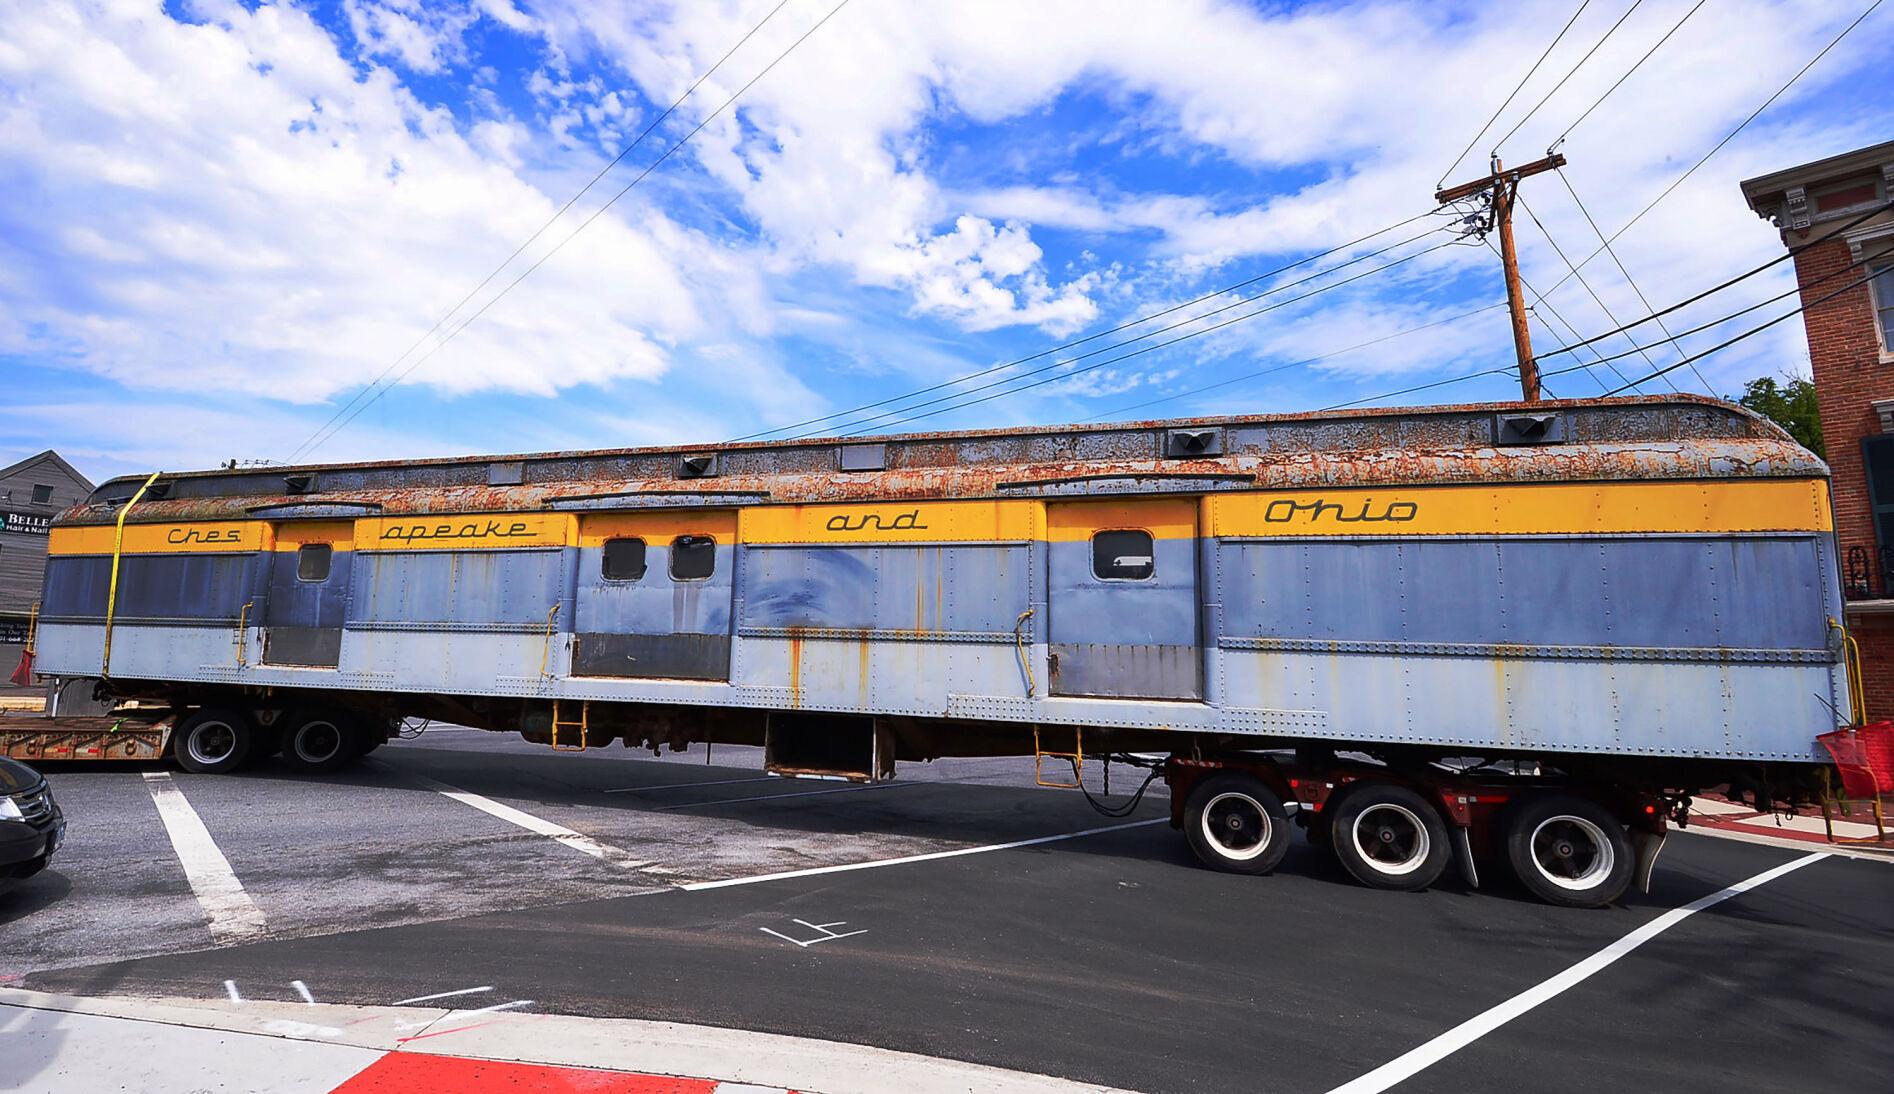 Train Cars Being Moved At Choo Choo As Part Of Over $10 Million